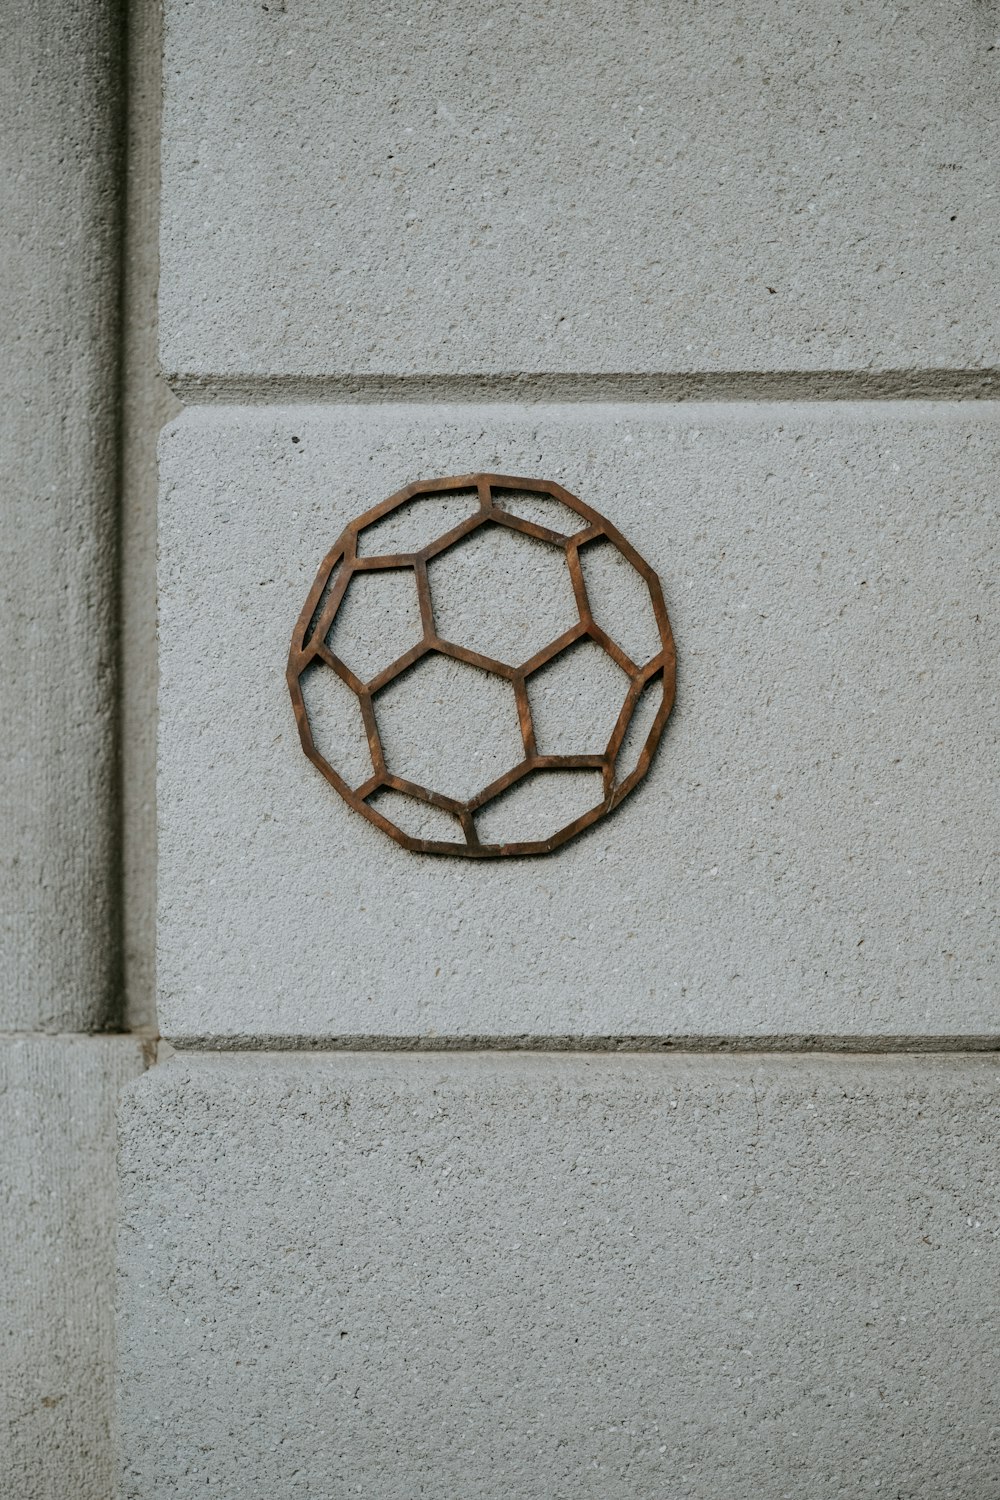 a circular object on the side of a building